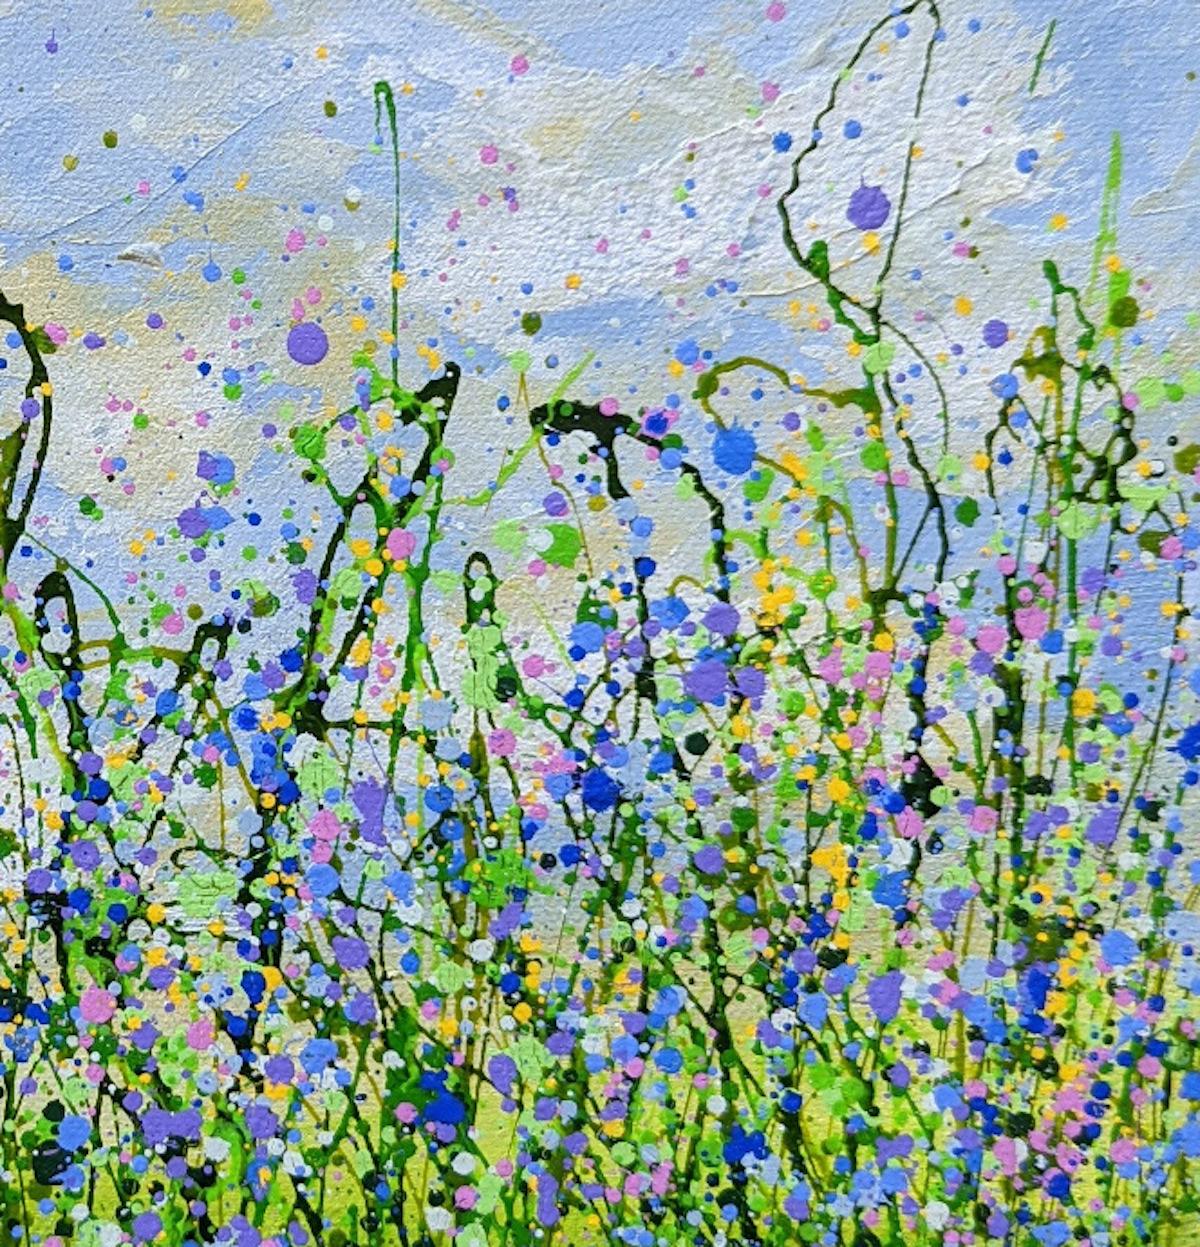 Hazy Bluebell Meadows by Lucy Moore [2022]
original and hand signed by the artist 
Acrylic on canvas
Image size: H:30 cm x W:30 cm
Complete Size of Unframed Work: H:30 cm x W:30 cm x D:1.5cm
Sold Unframed
Please note that insitu images are purely an